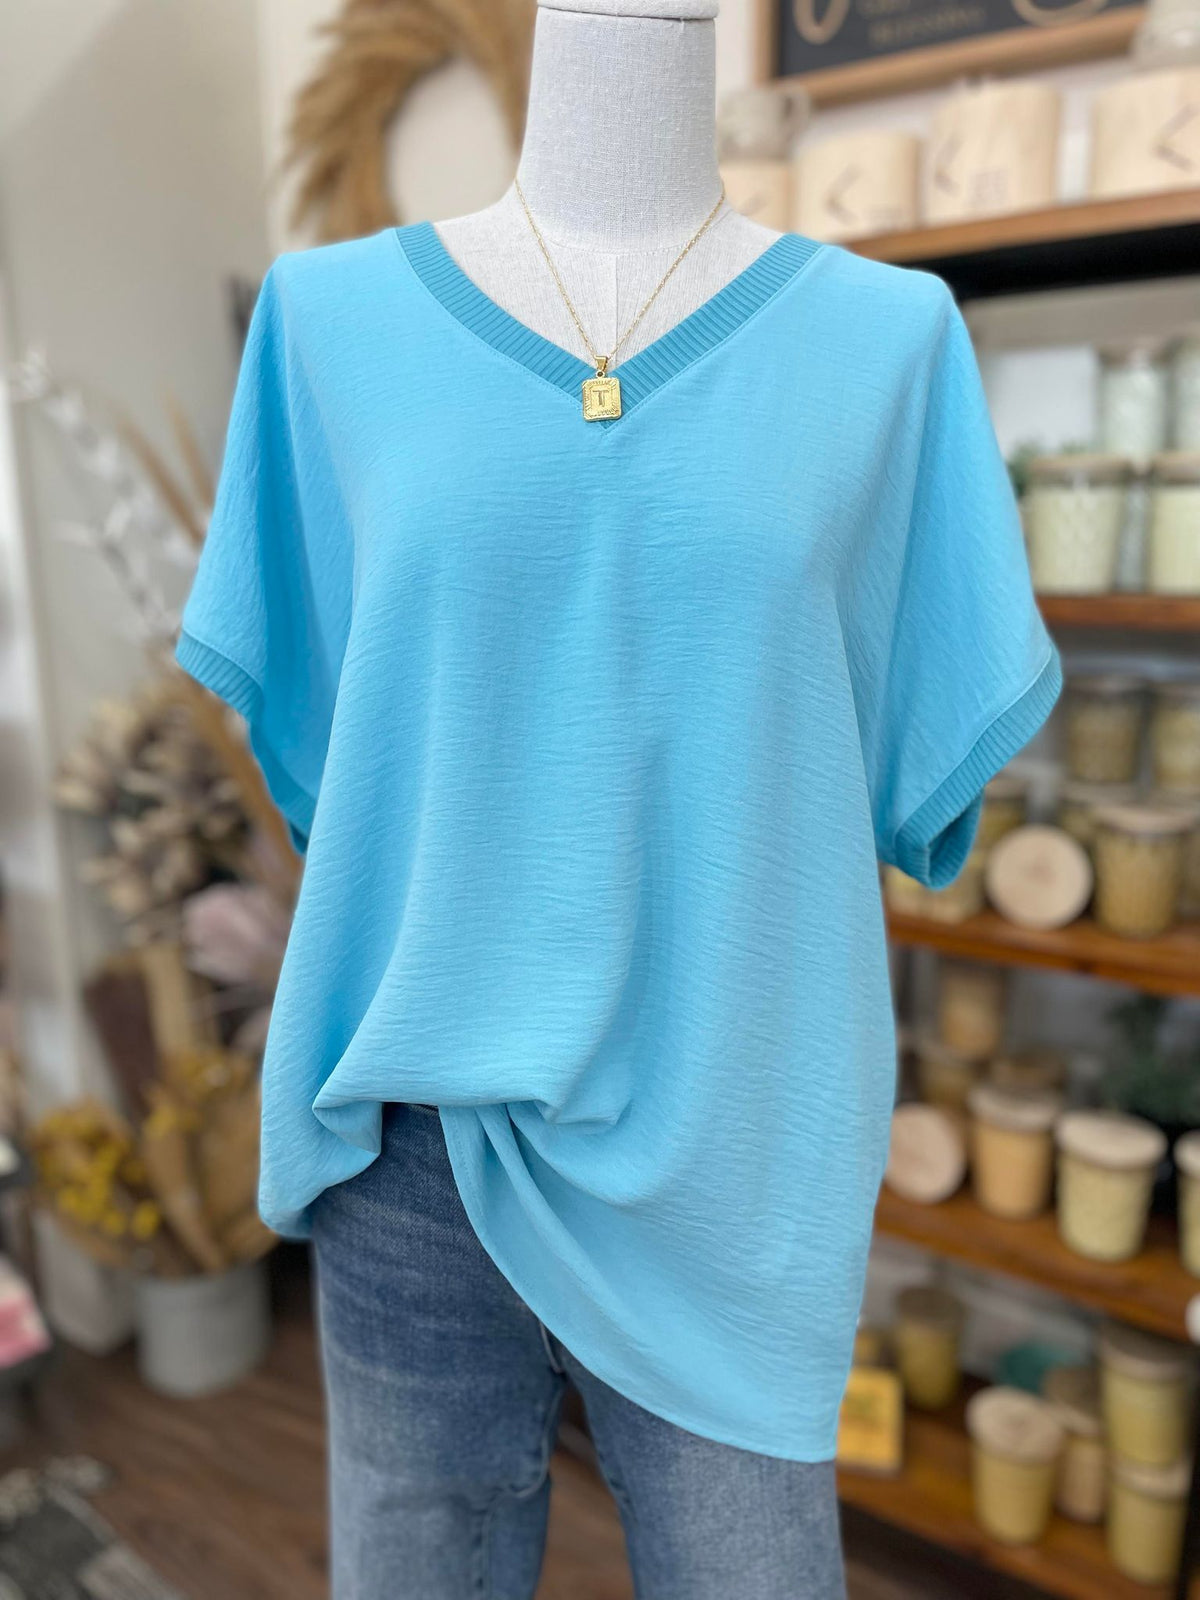 Ivy Jane / Uncle Frank Ivy Jane V-Neck Rib Trim Tee in Aqua Top - The Attic Boutique